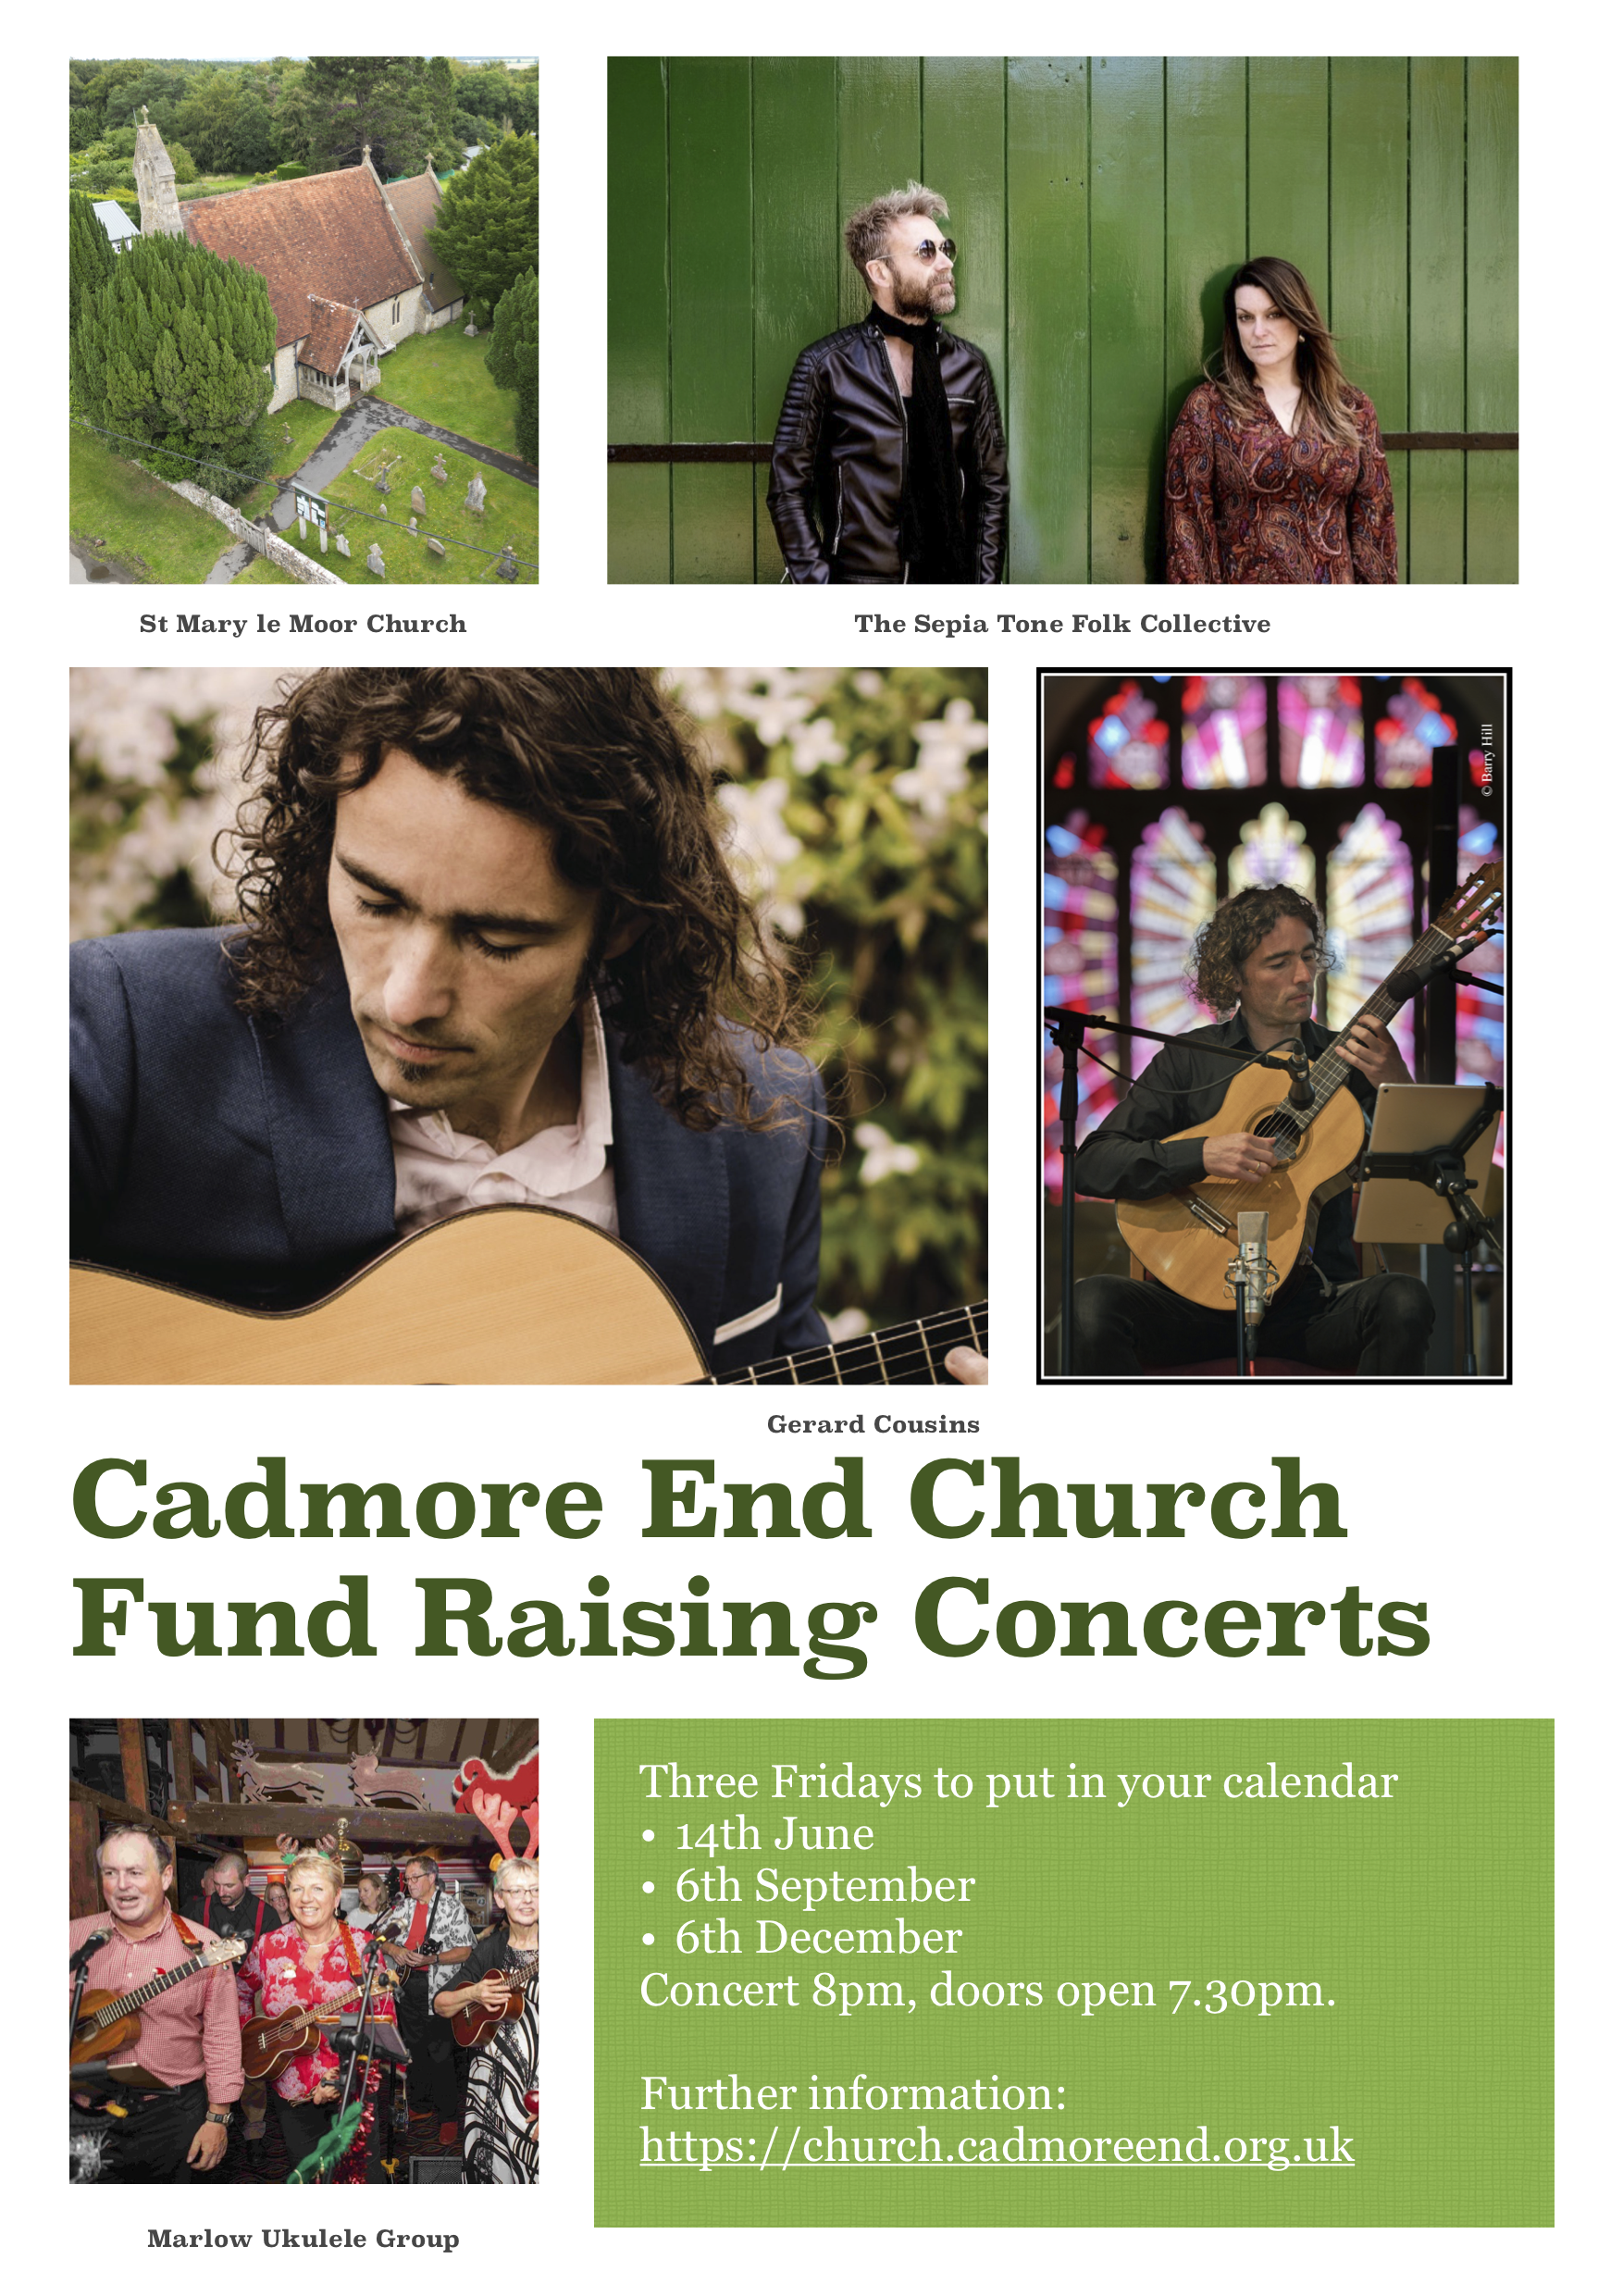 Cadmore End Church Fund Raising Concerts